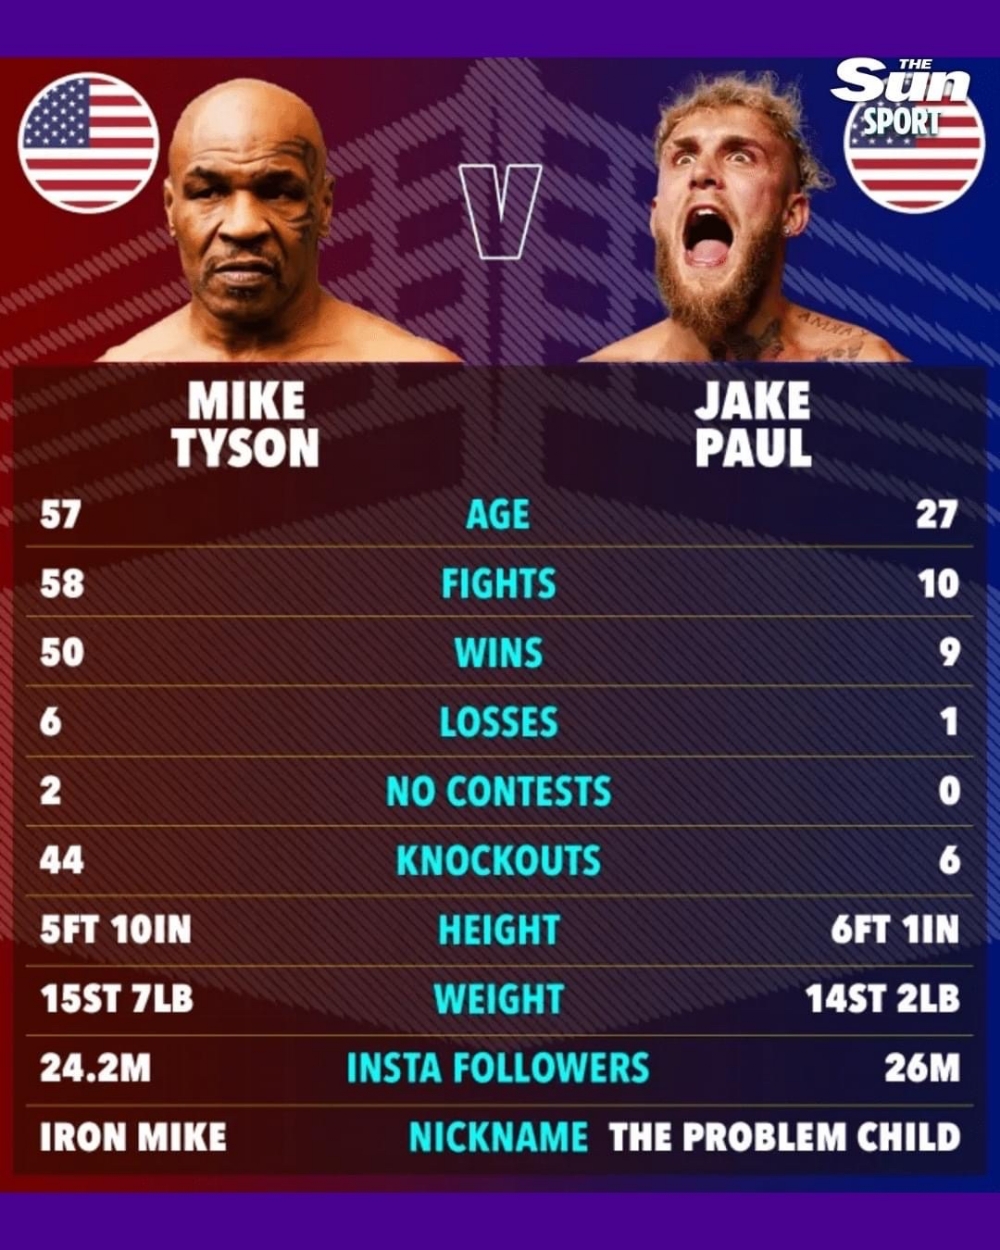 Mike Tyson vs Jake Paul is going to be explosive ??  That age gap... ??